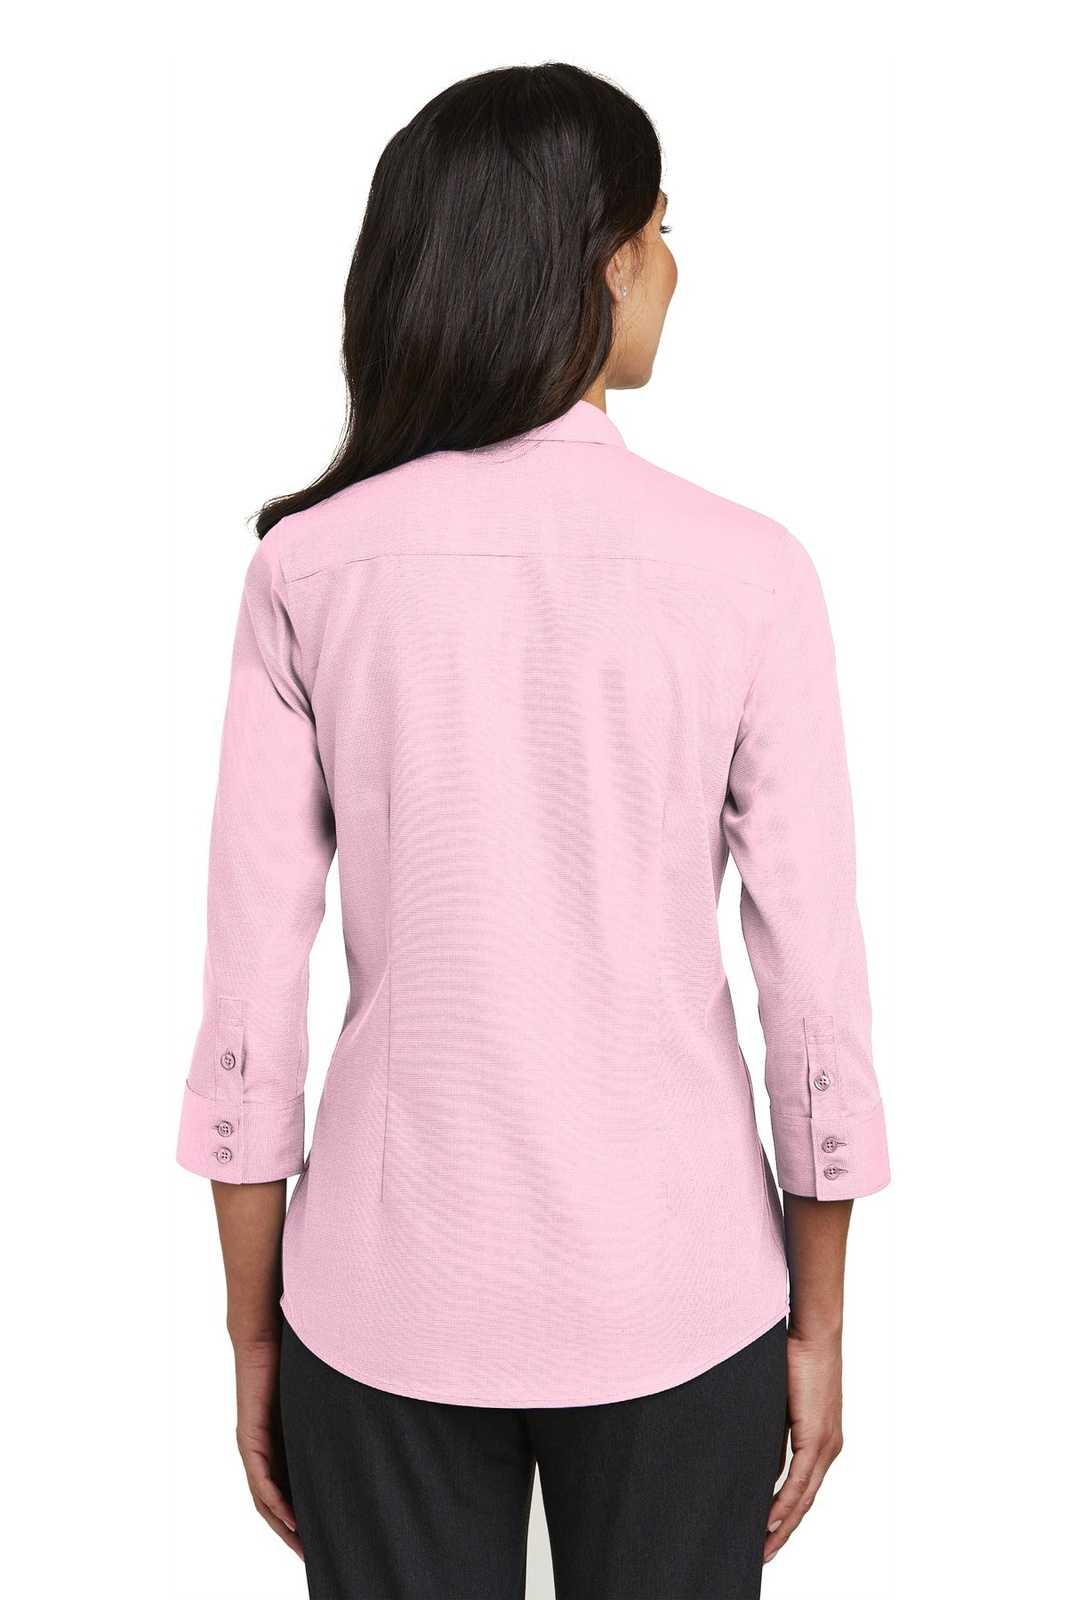 Red House RH690 Ladies 3/4-Sleeve Nailhead Non-Iron Shirt - Pink - HIT a Double - 2